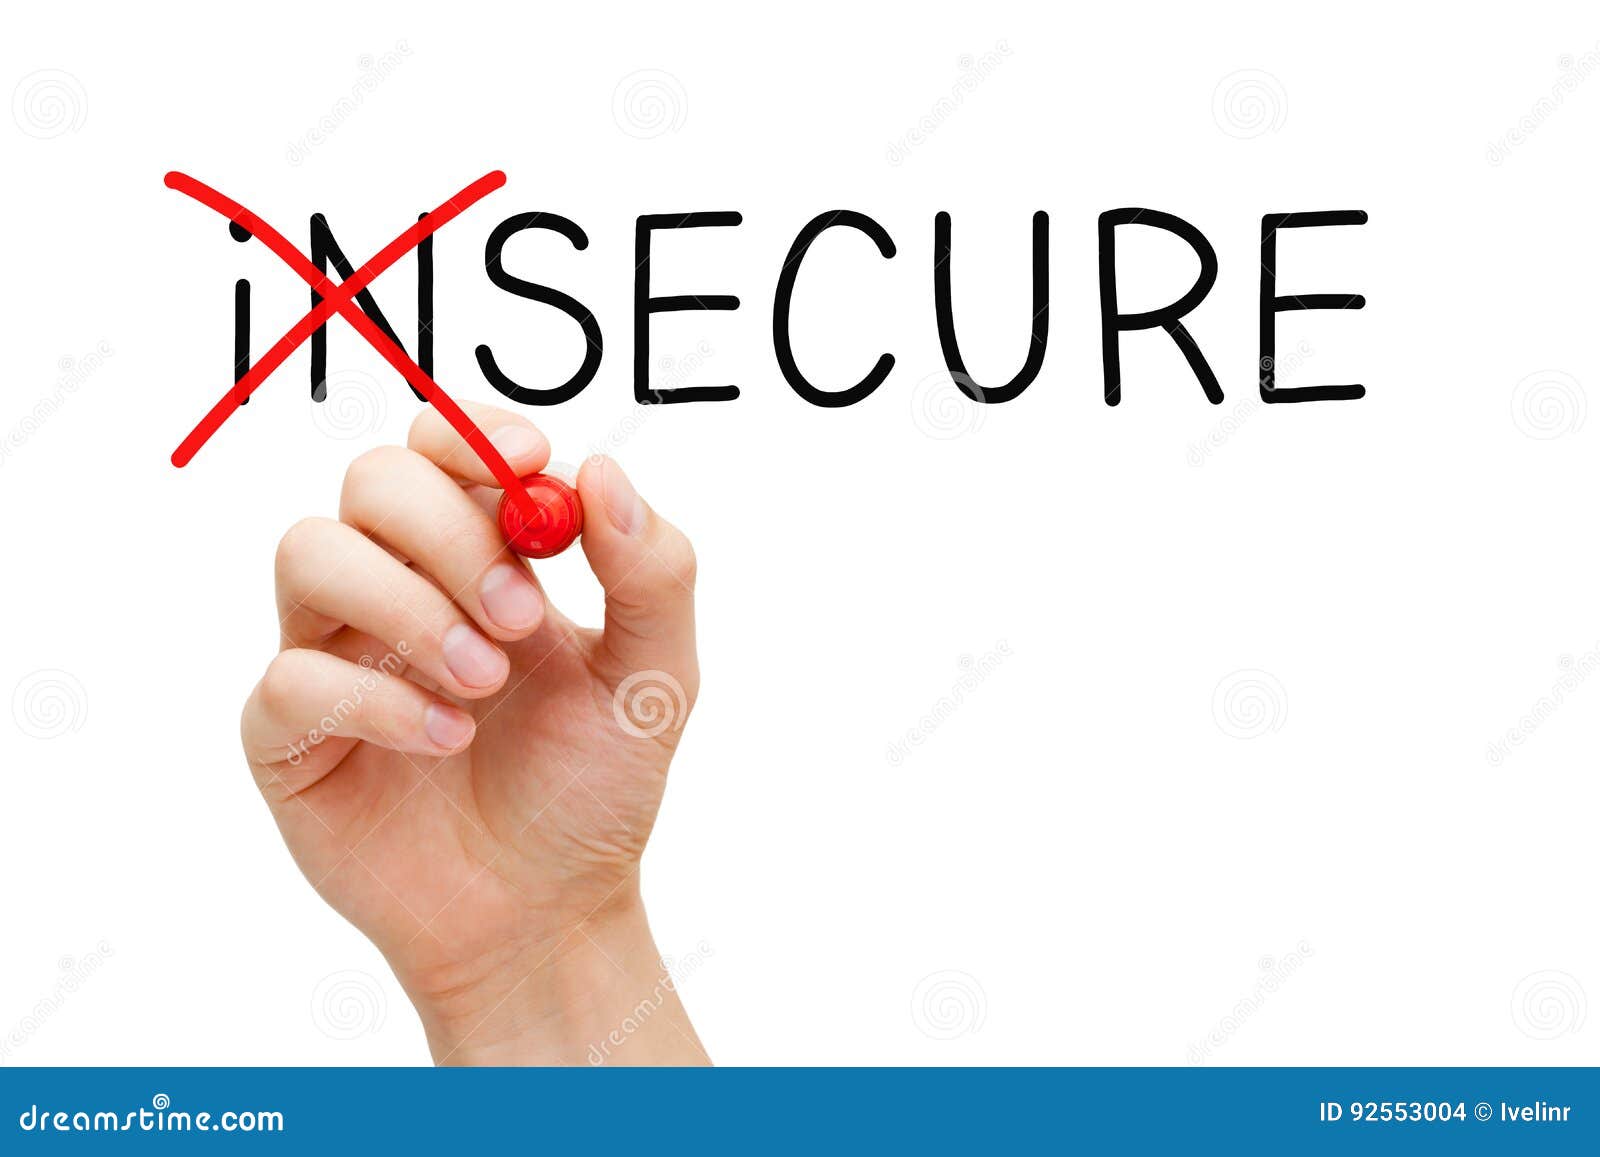 secure not insecure